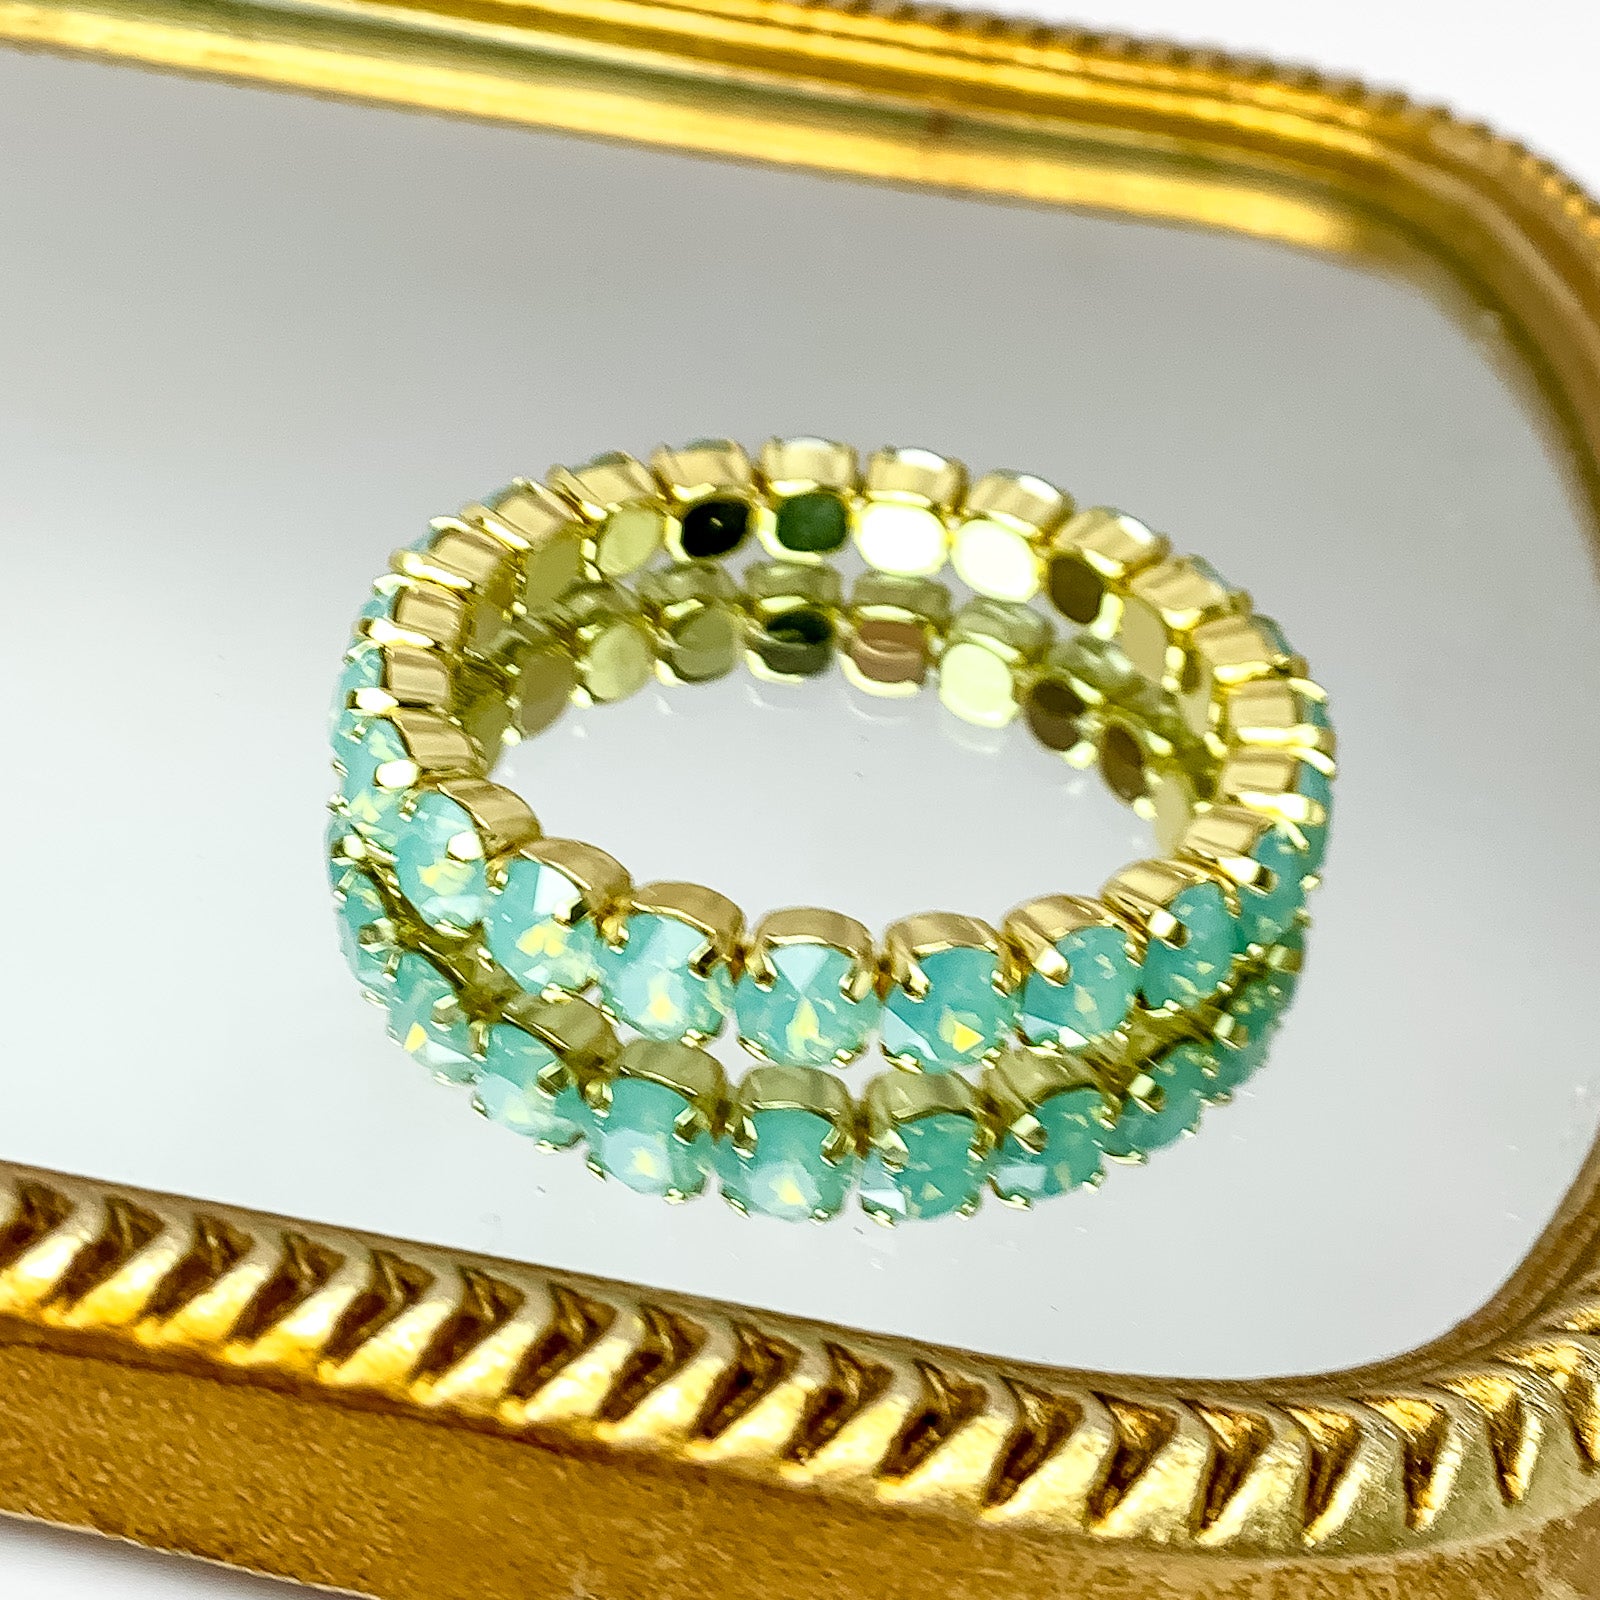 Stretchy light blue crystal bracelet with gold undertones. Pictured on a mirror with a gold trim.  